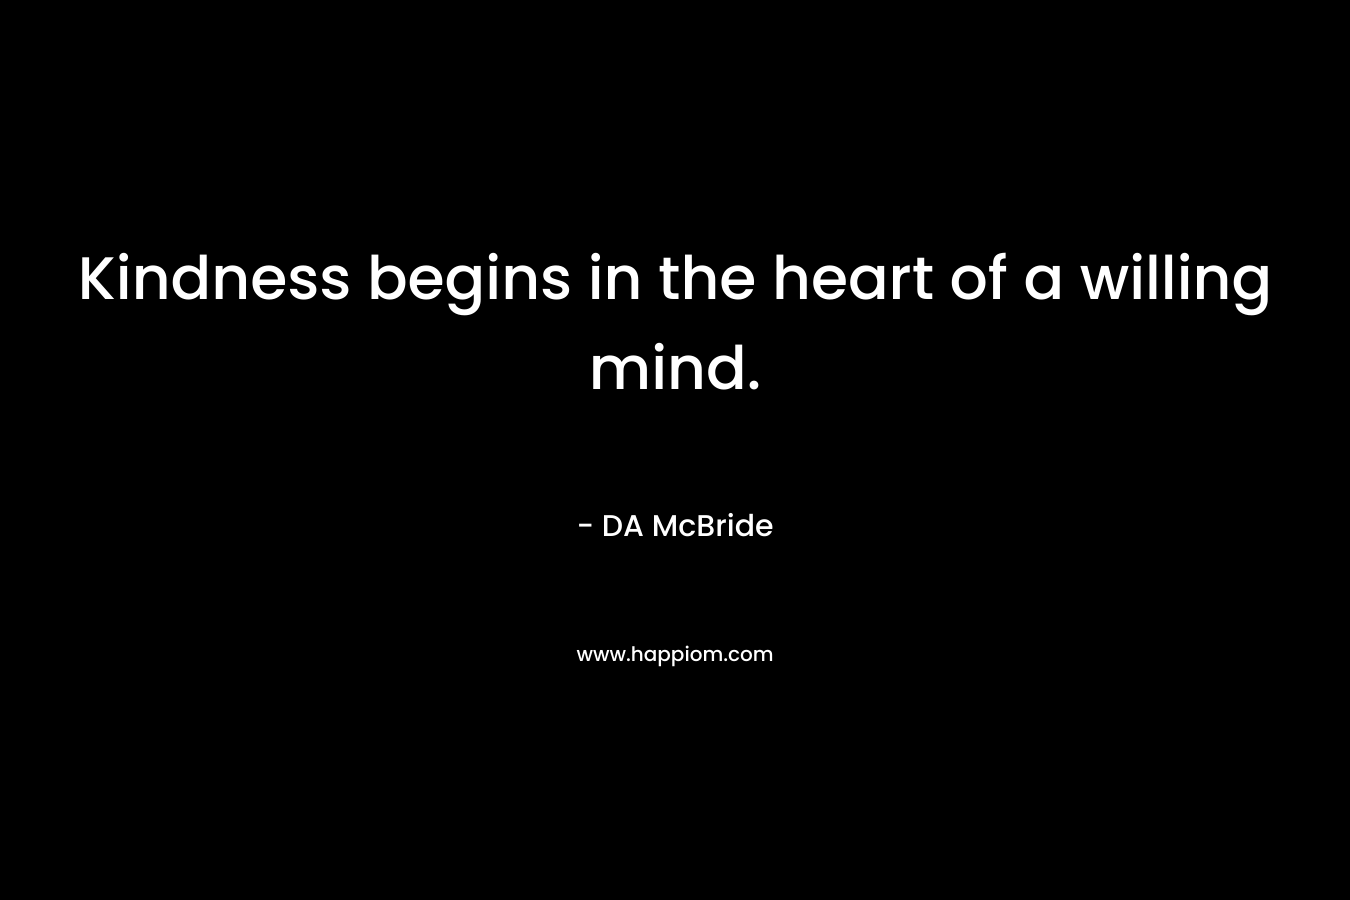 Kindness begins in the heart of a willing mind.